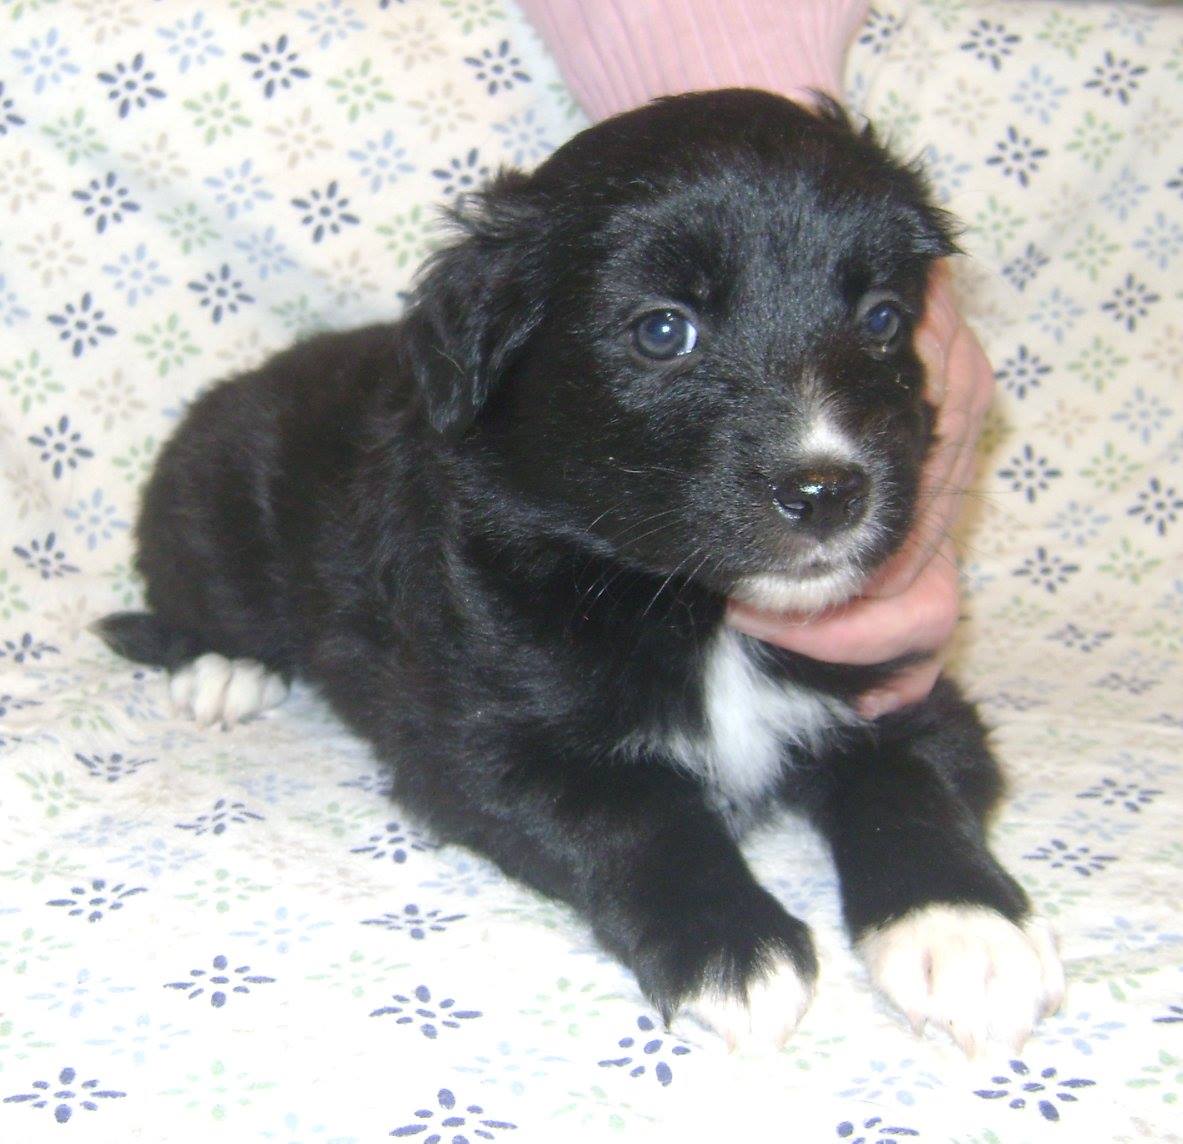 Dill is a male puppy from YARN's Pickle litter.